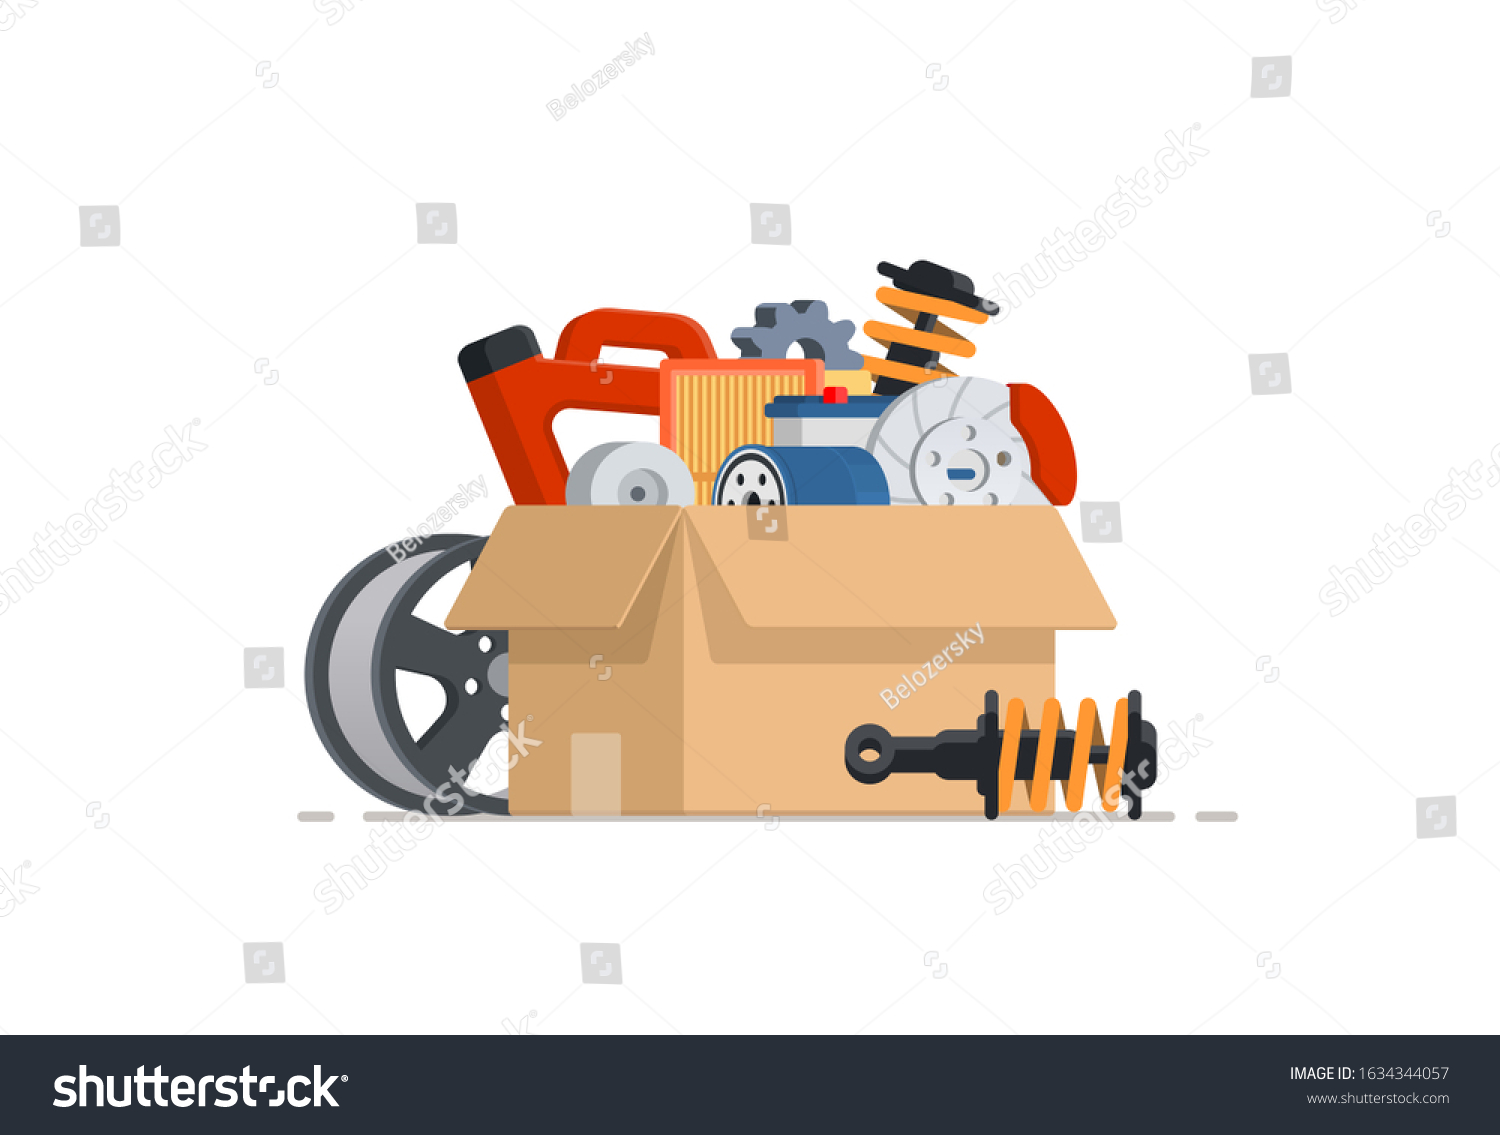 SVG of Cardboard with car parts. Various auto accessories. Concept for shop. Vector illustration isolated on white background. svg